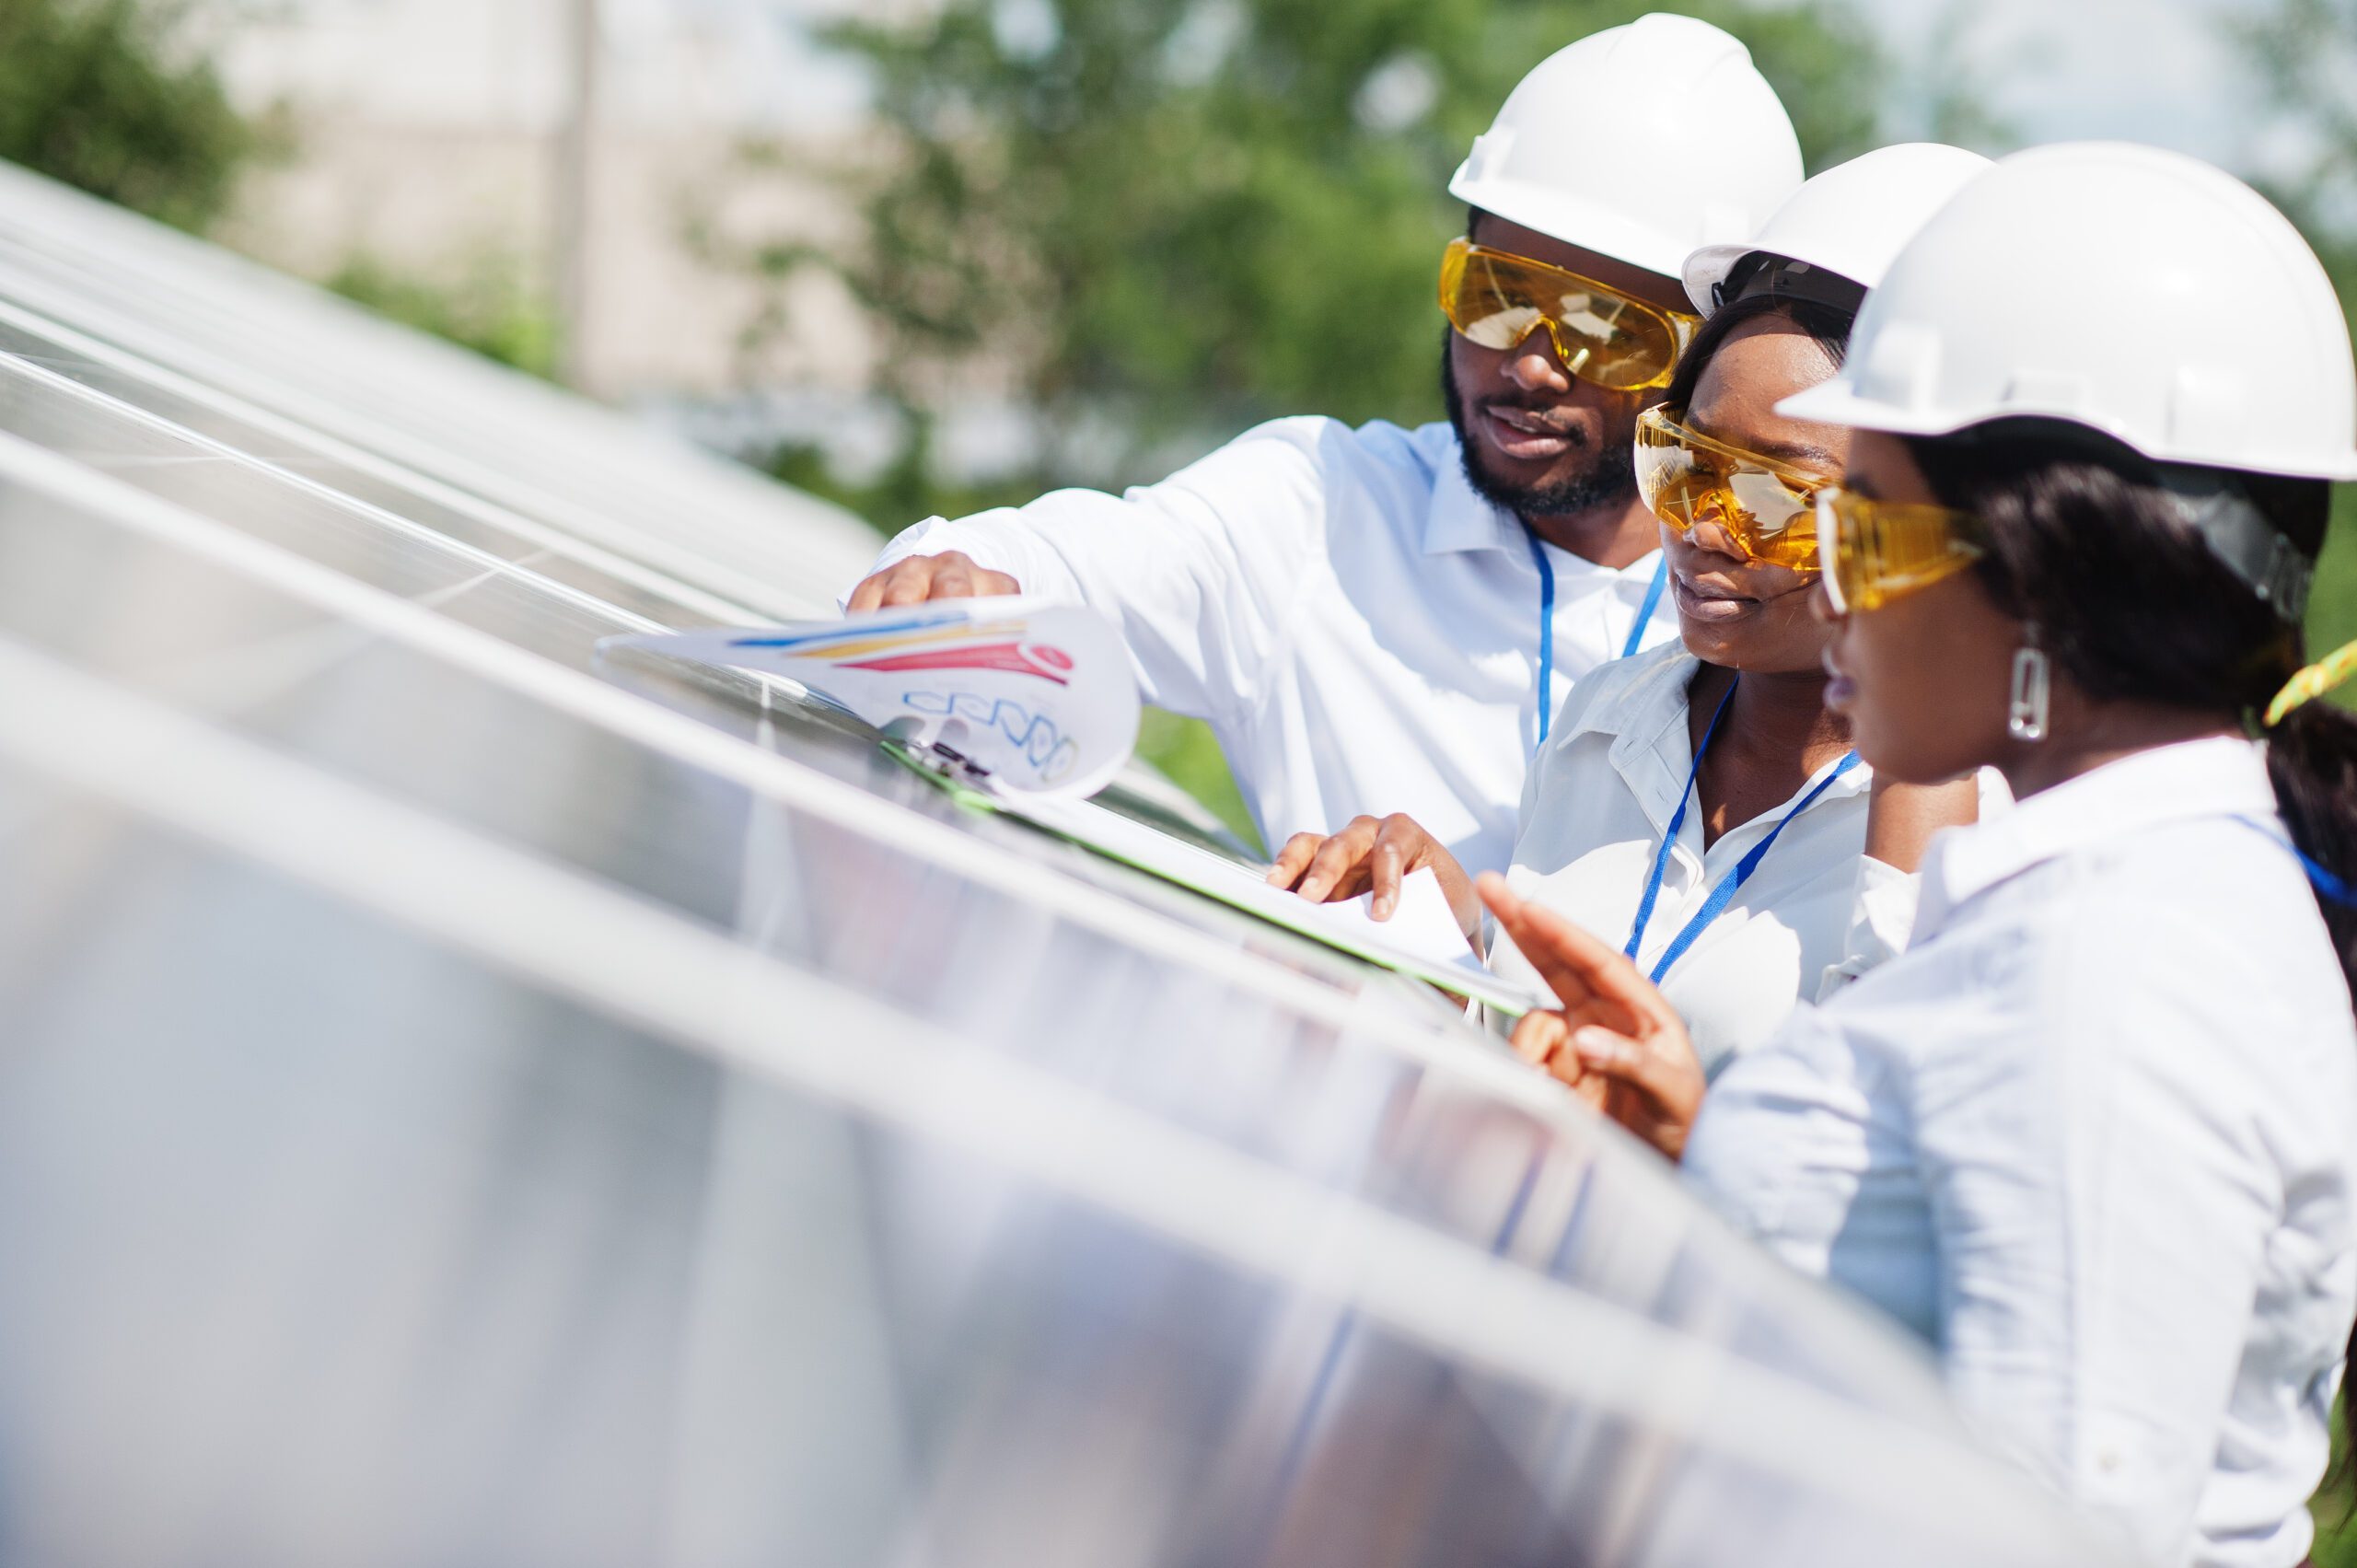 Three people wearing protective equipment standing near a solar panel and looking at some paperwork.